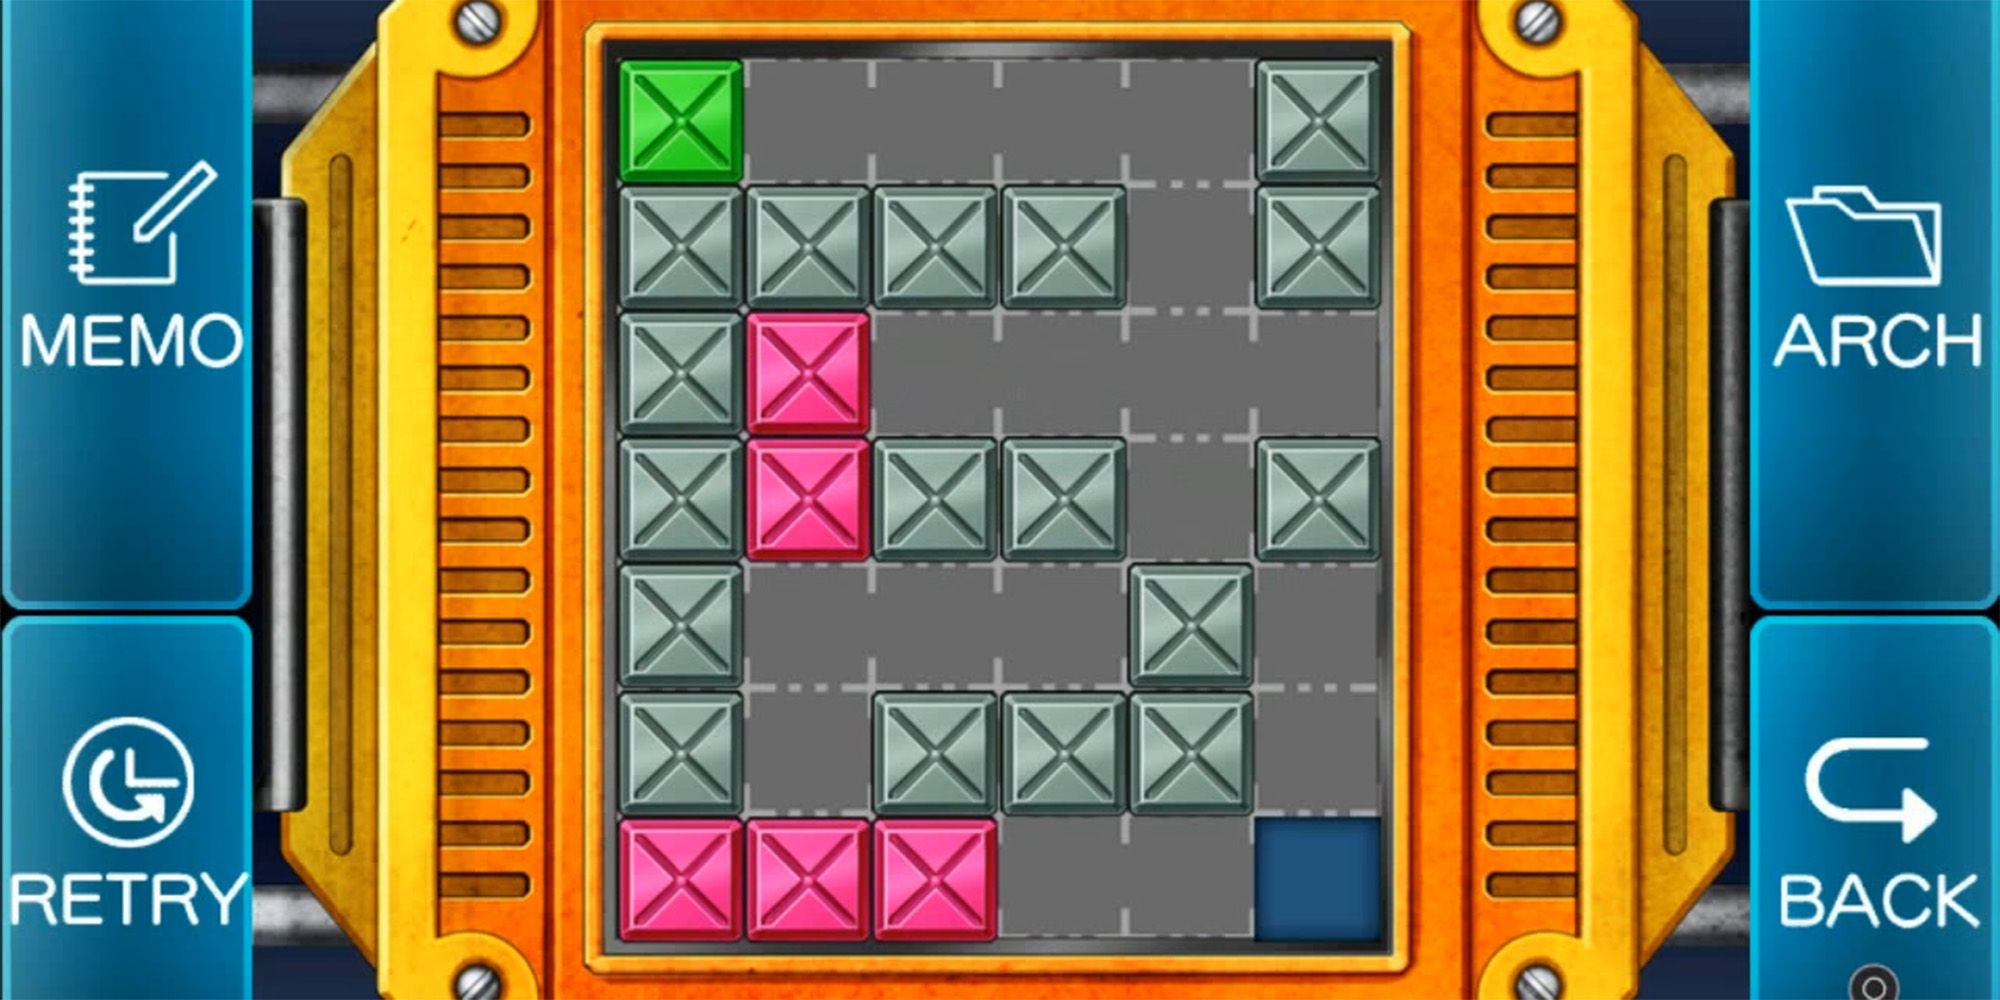 mini game in the elevator, moving green block by sliding it around the grid